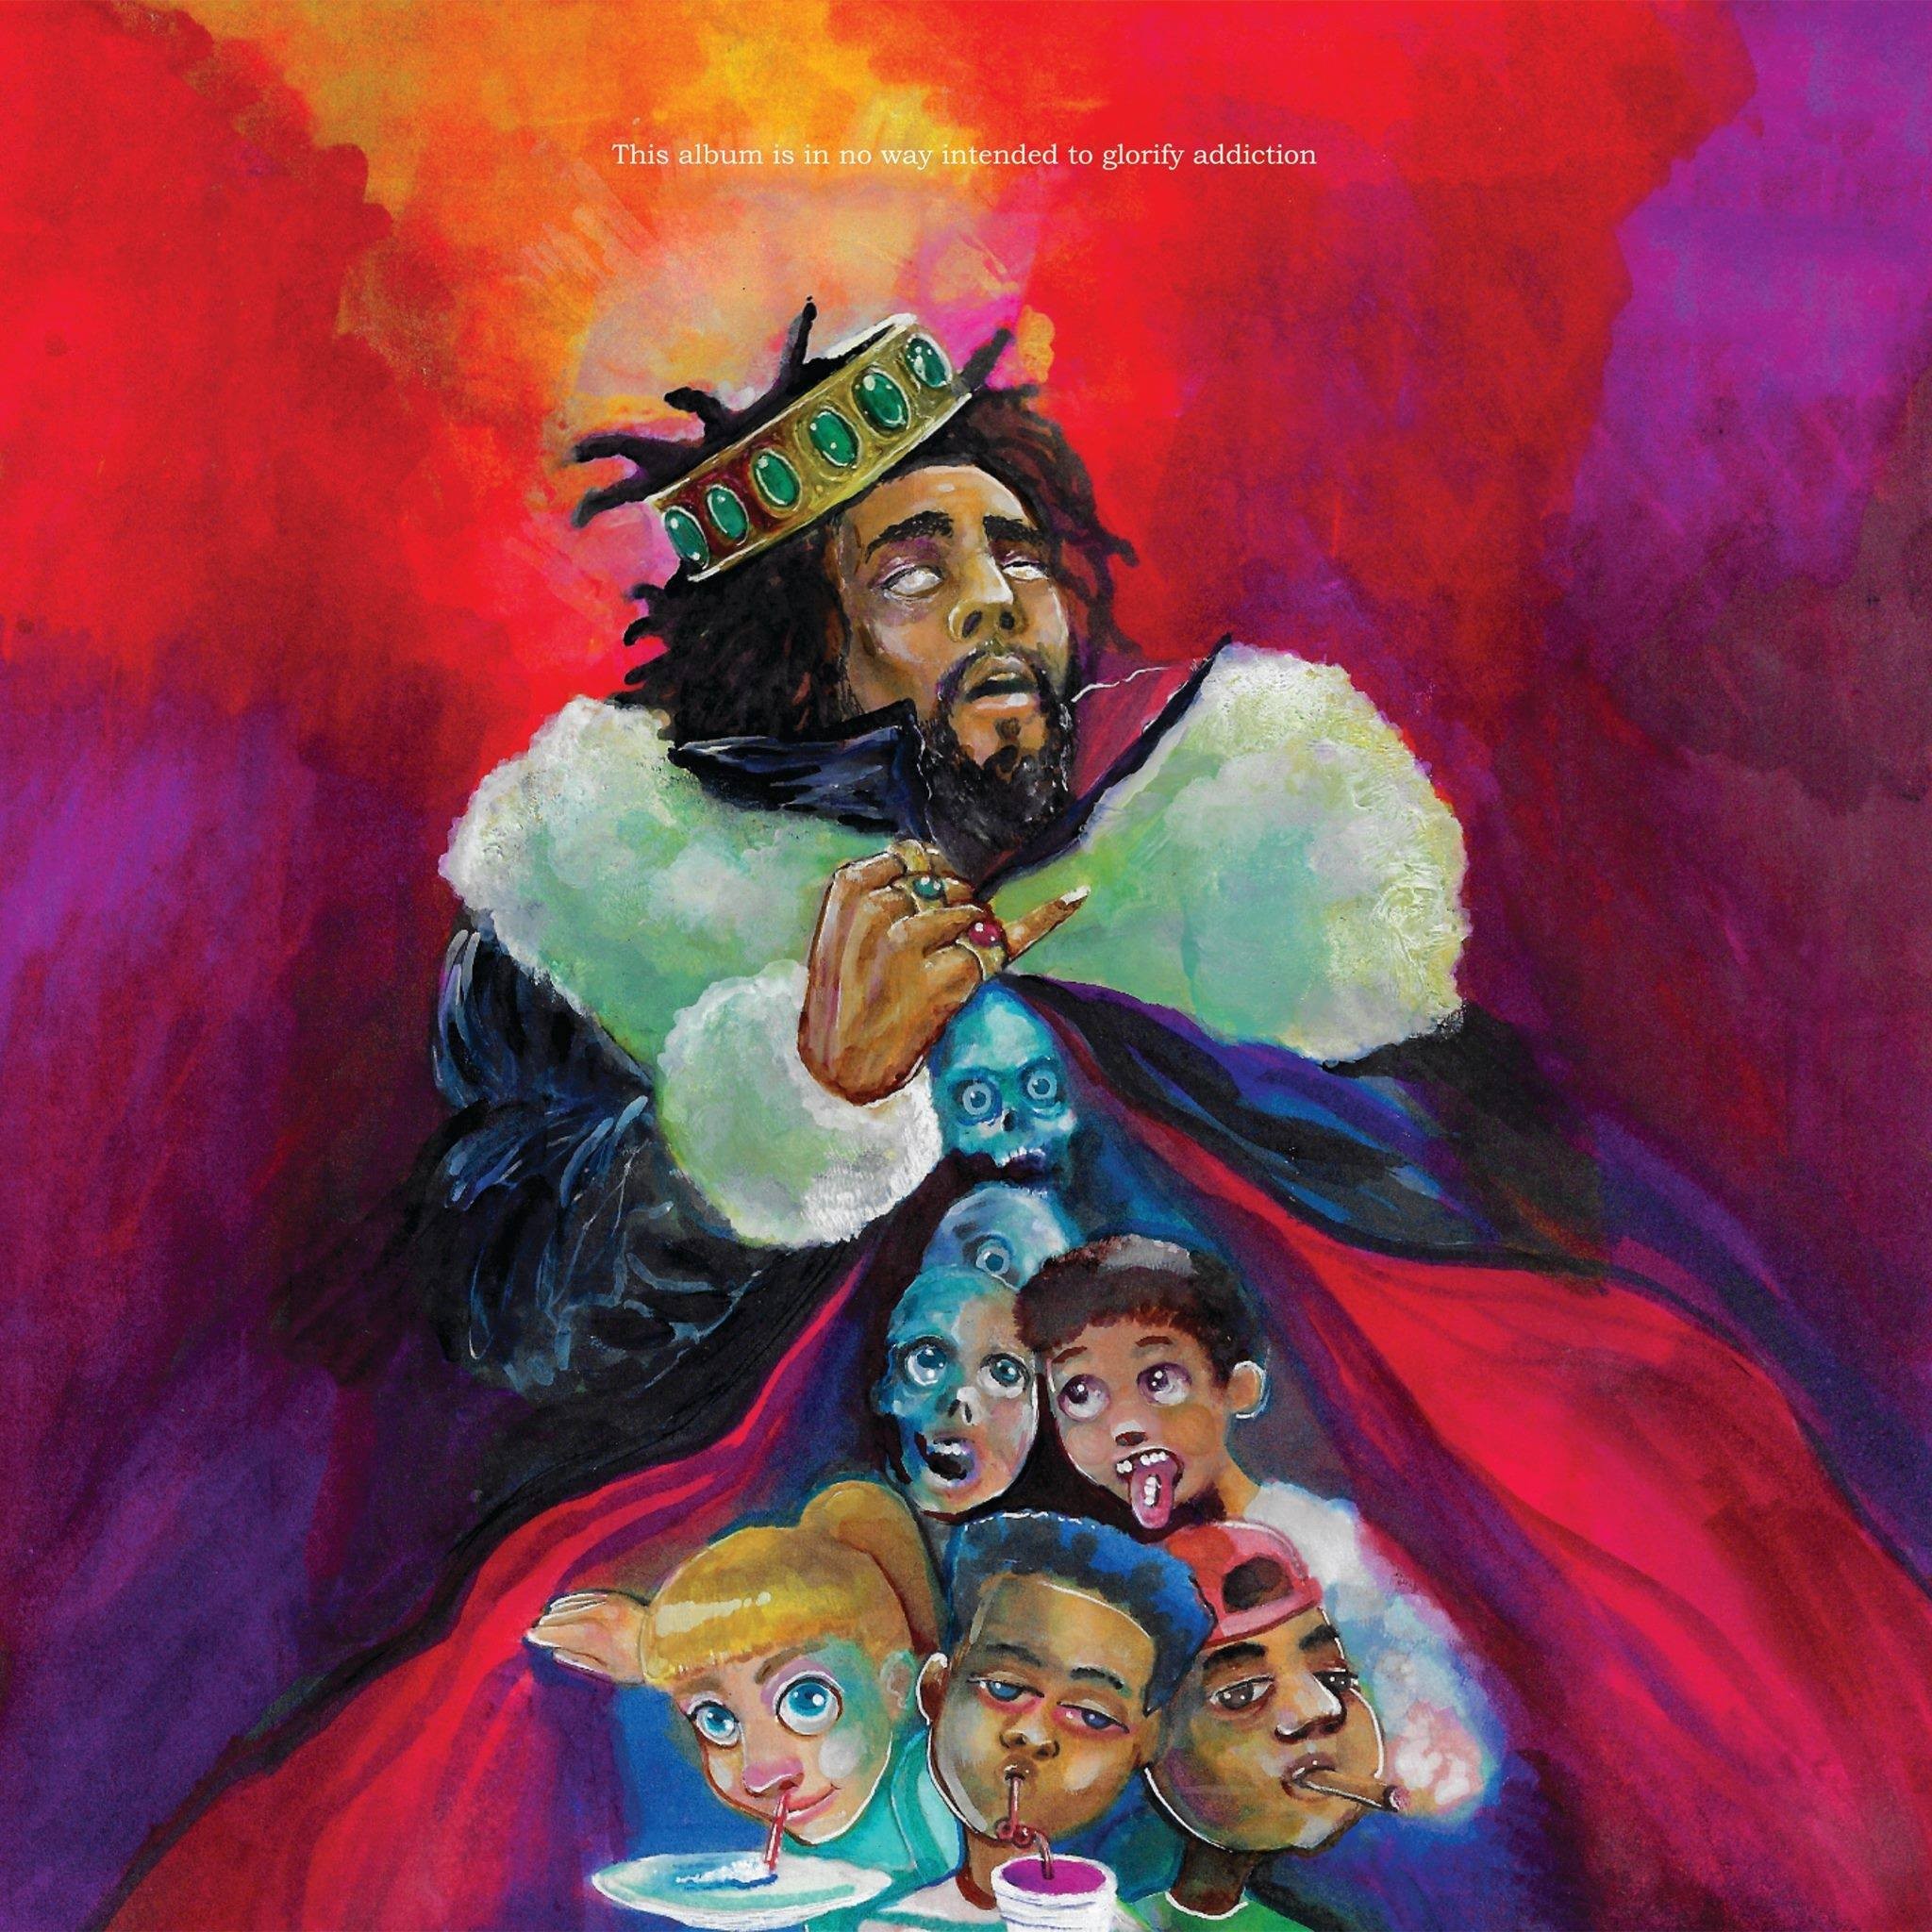 J. Cole's new album cover is designed by a Detroitbased artist